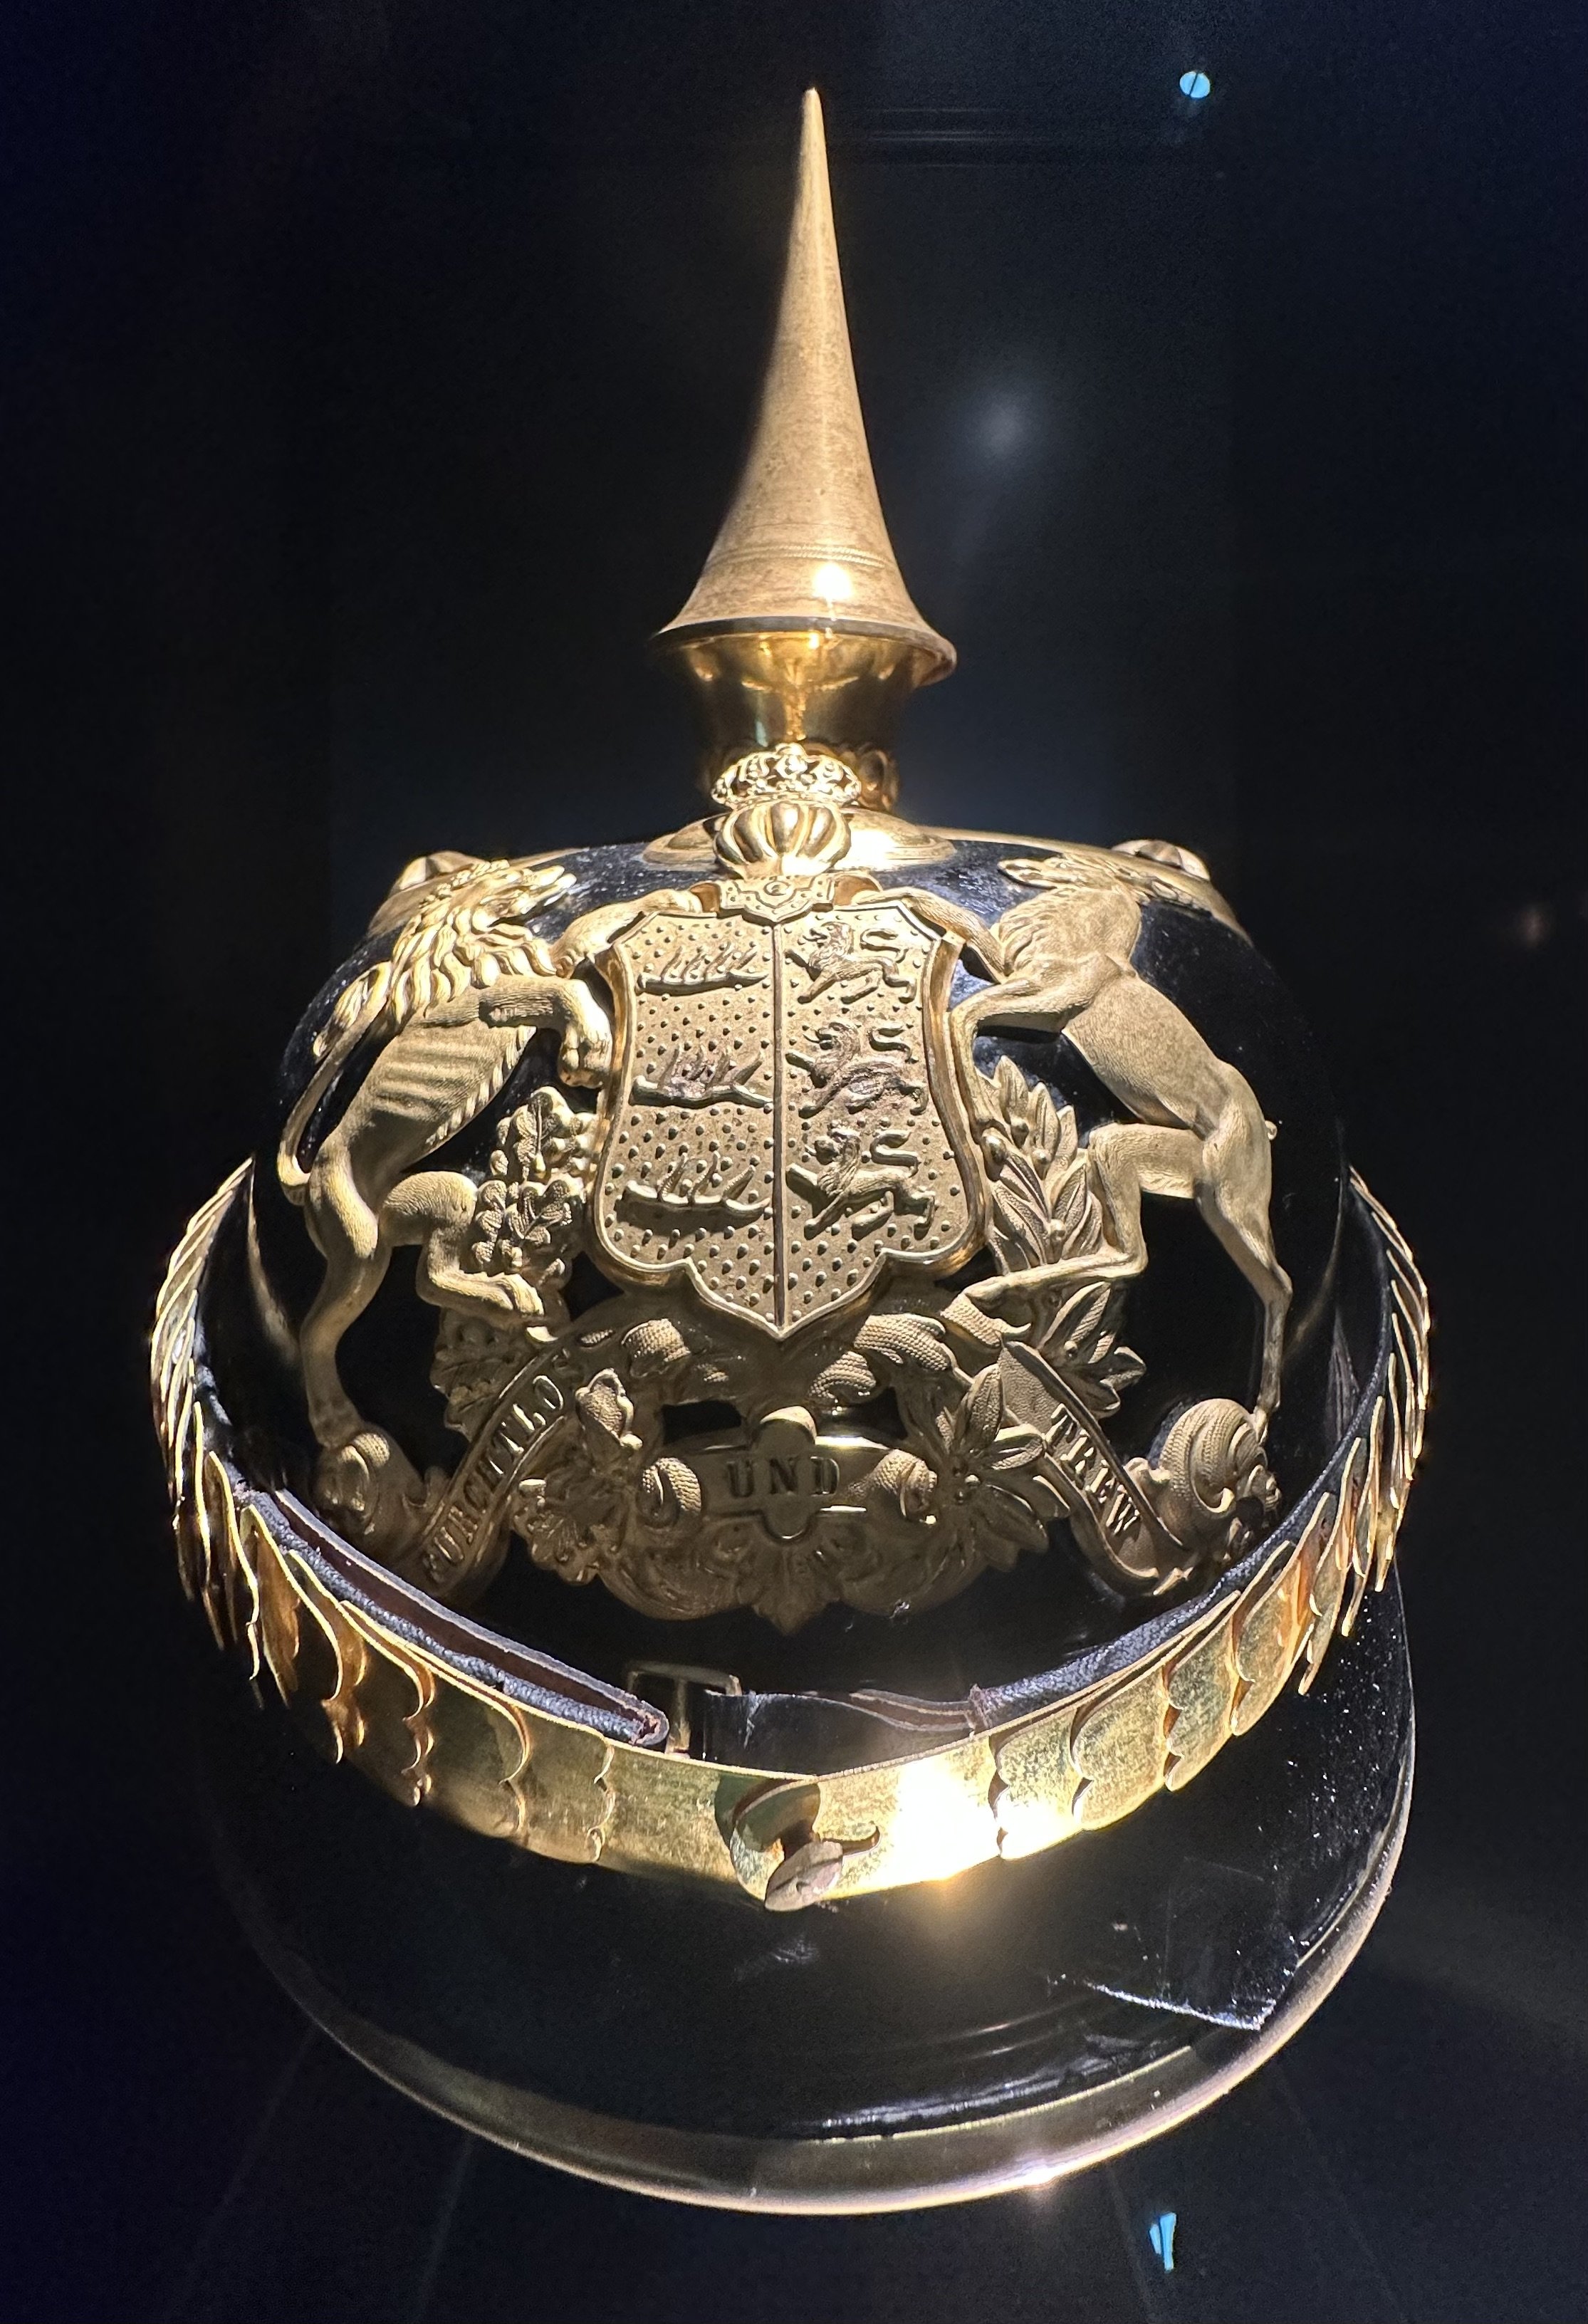 1897 The Pickelhaube Spiked Helmet used by officers of the military Landesmuseum Wurttemberg.jpeg